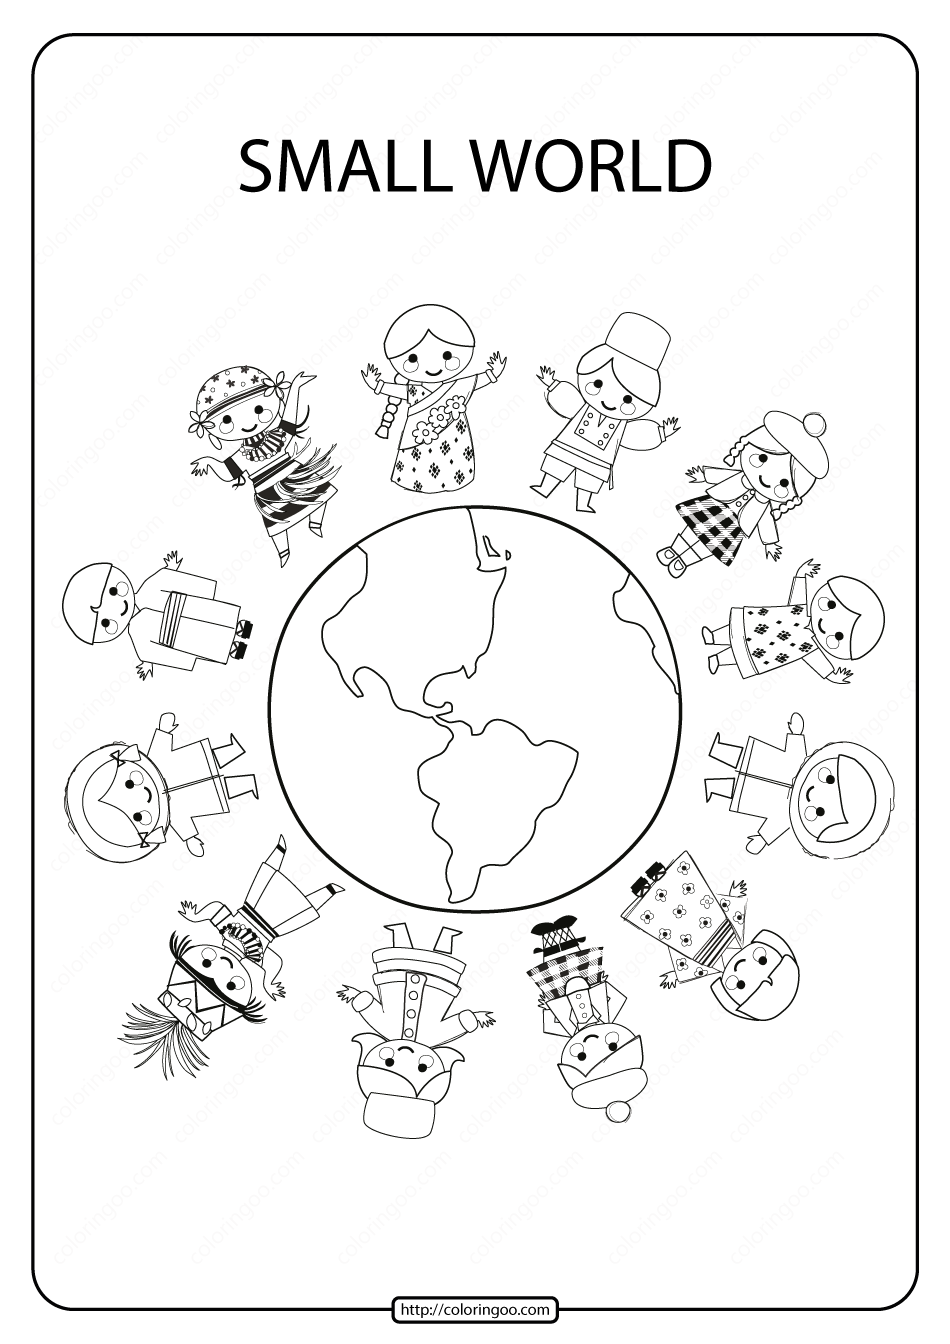 Explore the small world with this printable coloring page